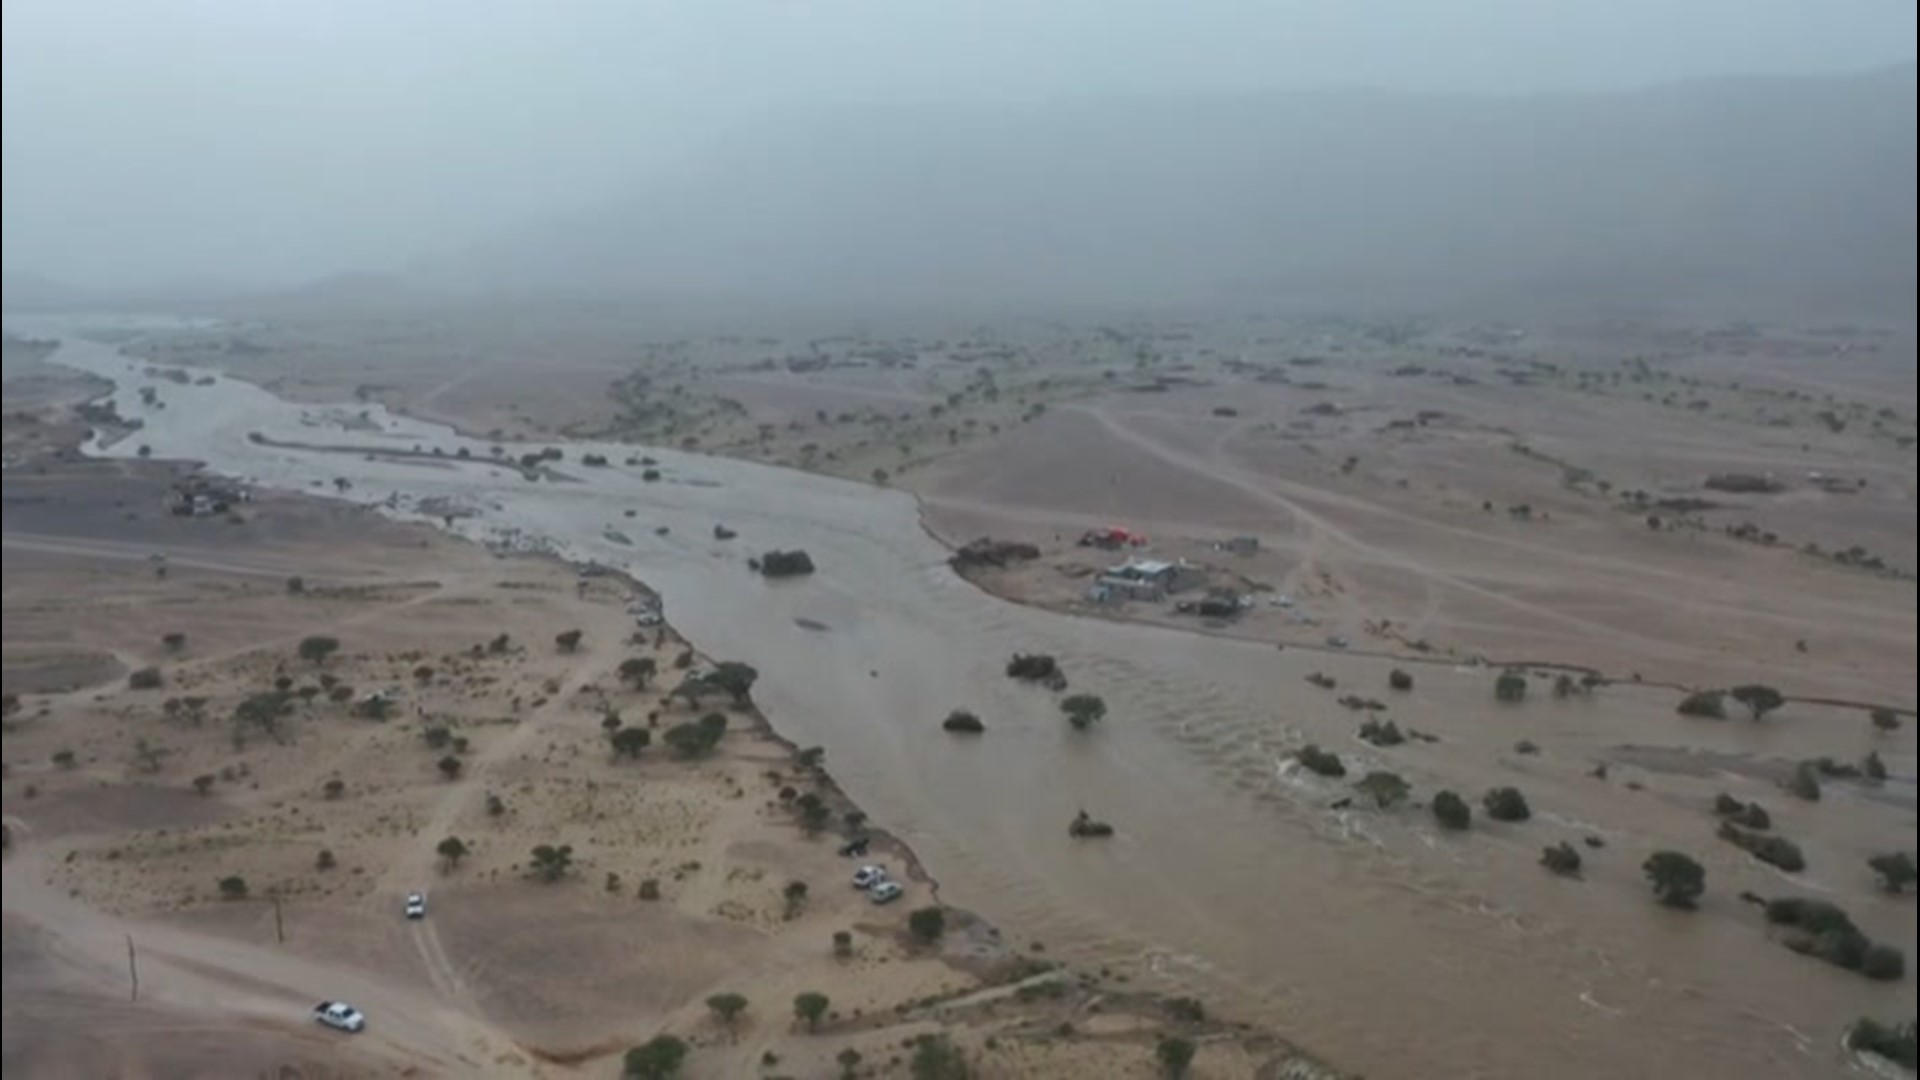 At least 17 people are dead after storms brought flash flooding and lightning to the Marib region of Yemen on Aug. 4.